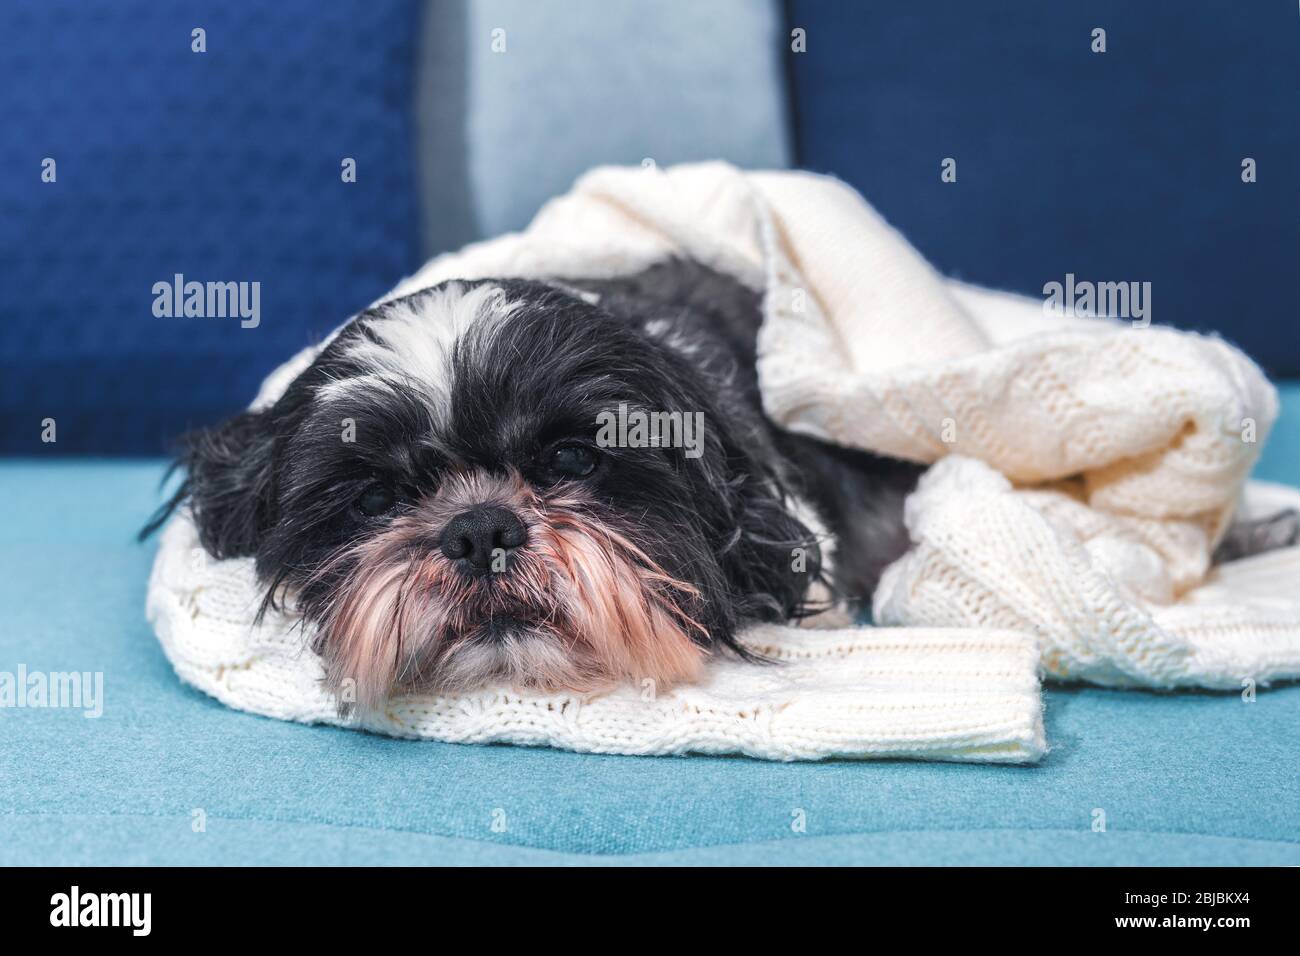 Funny cute dog is sitting on a sofa covered with a knitted sweater. Shih Tzu breed, gray with white. pet. Homeliness.  Stock Photo